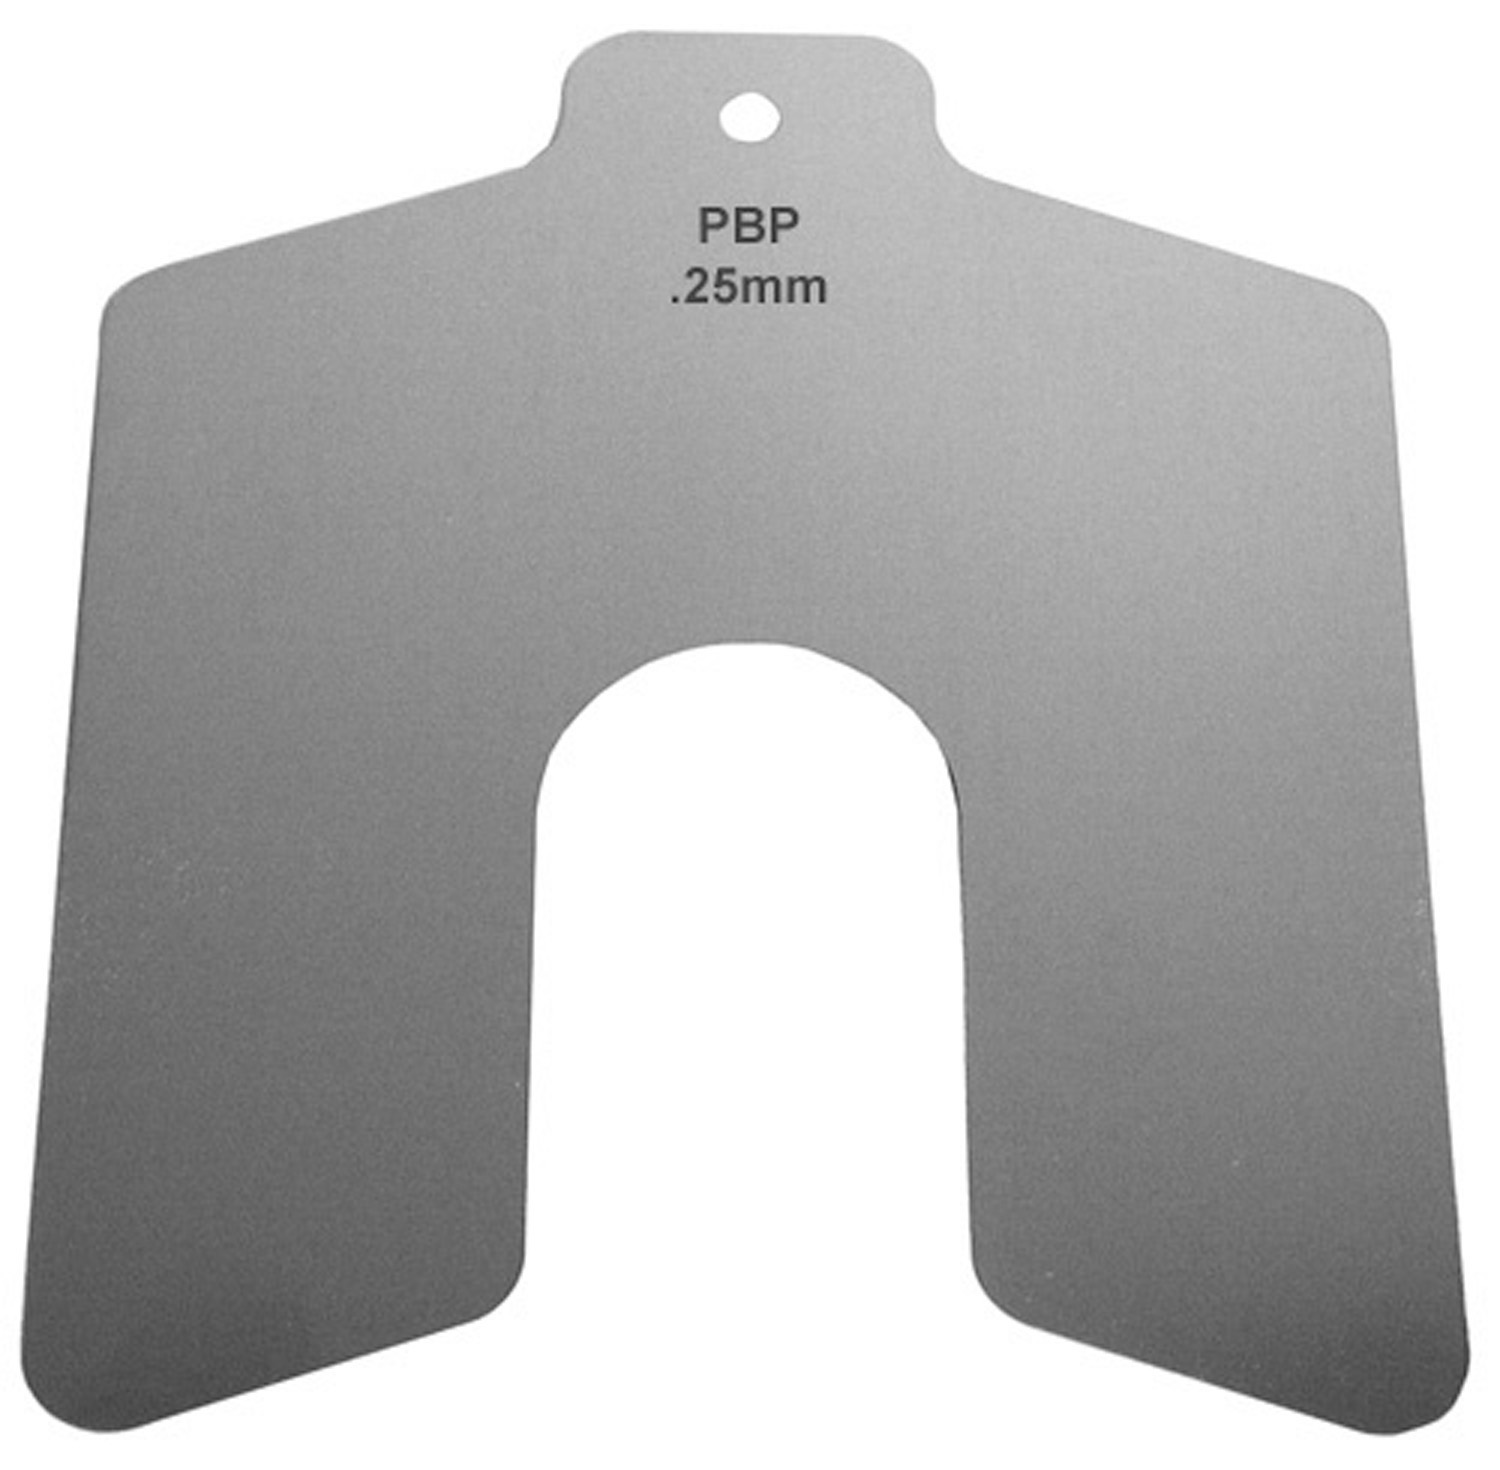 Precision Brand Stainless Slotted Shim 2"x2" Gauge .010 Slot Size 5/8" 